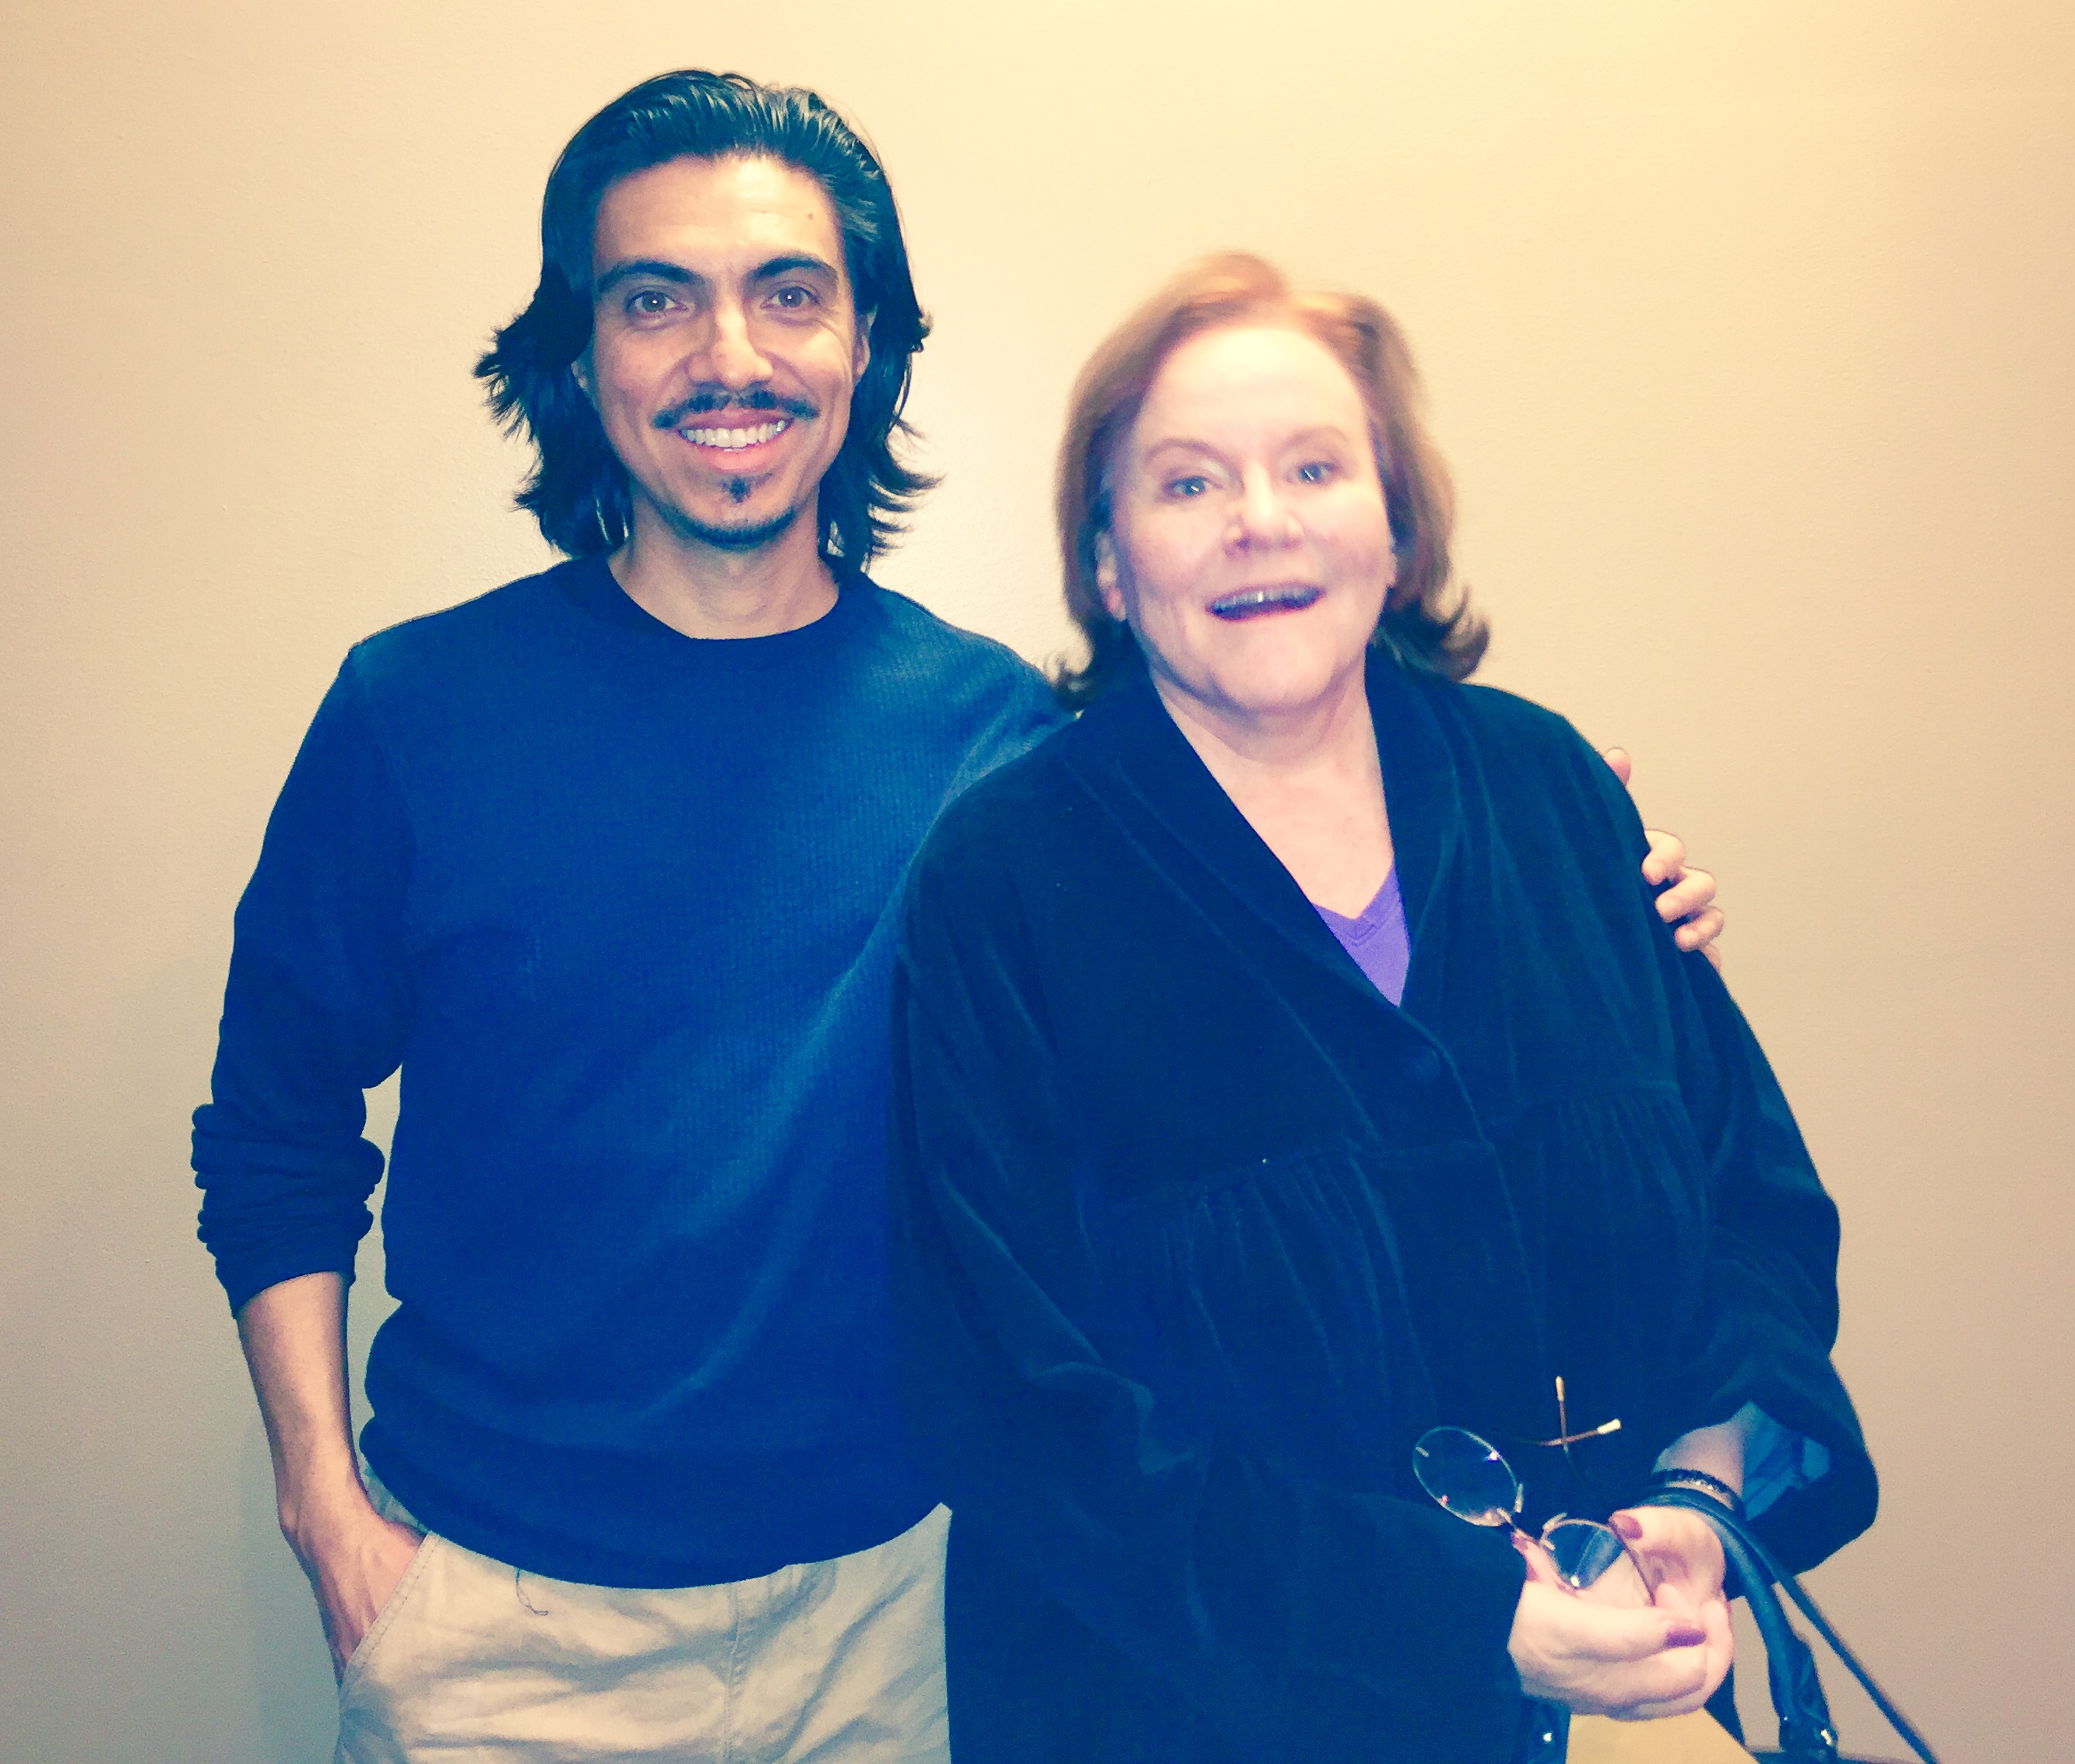 With the talented acres Edie McClurg